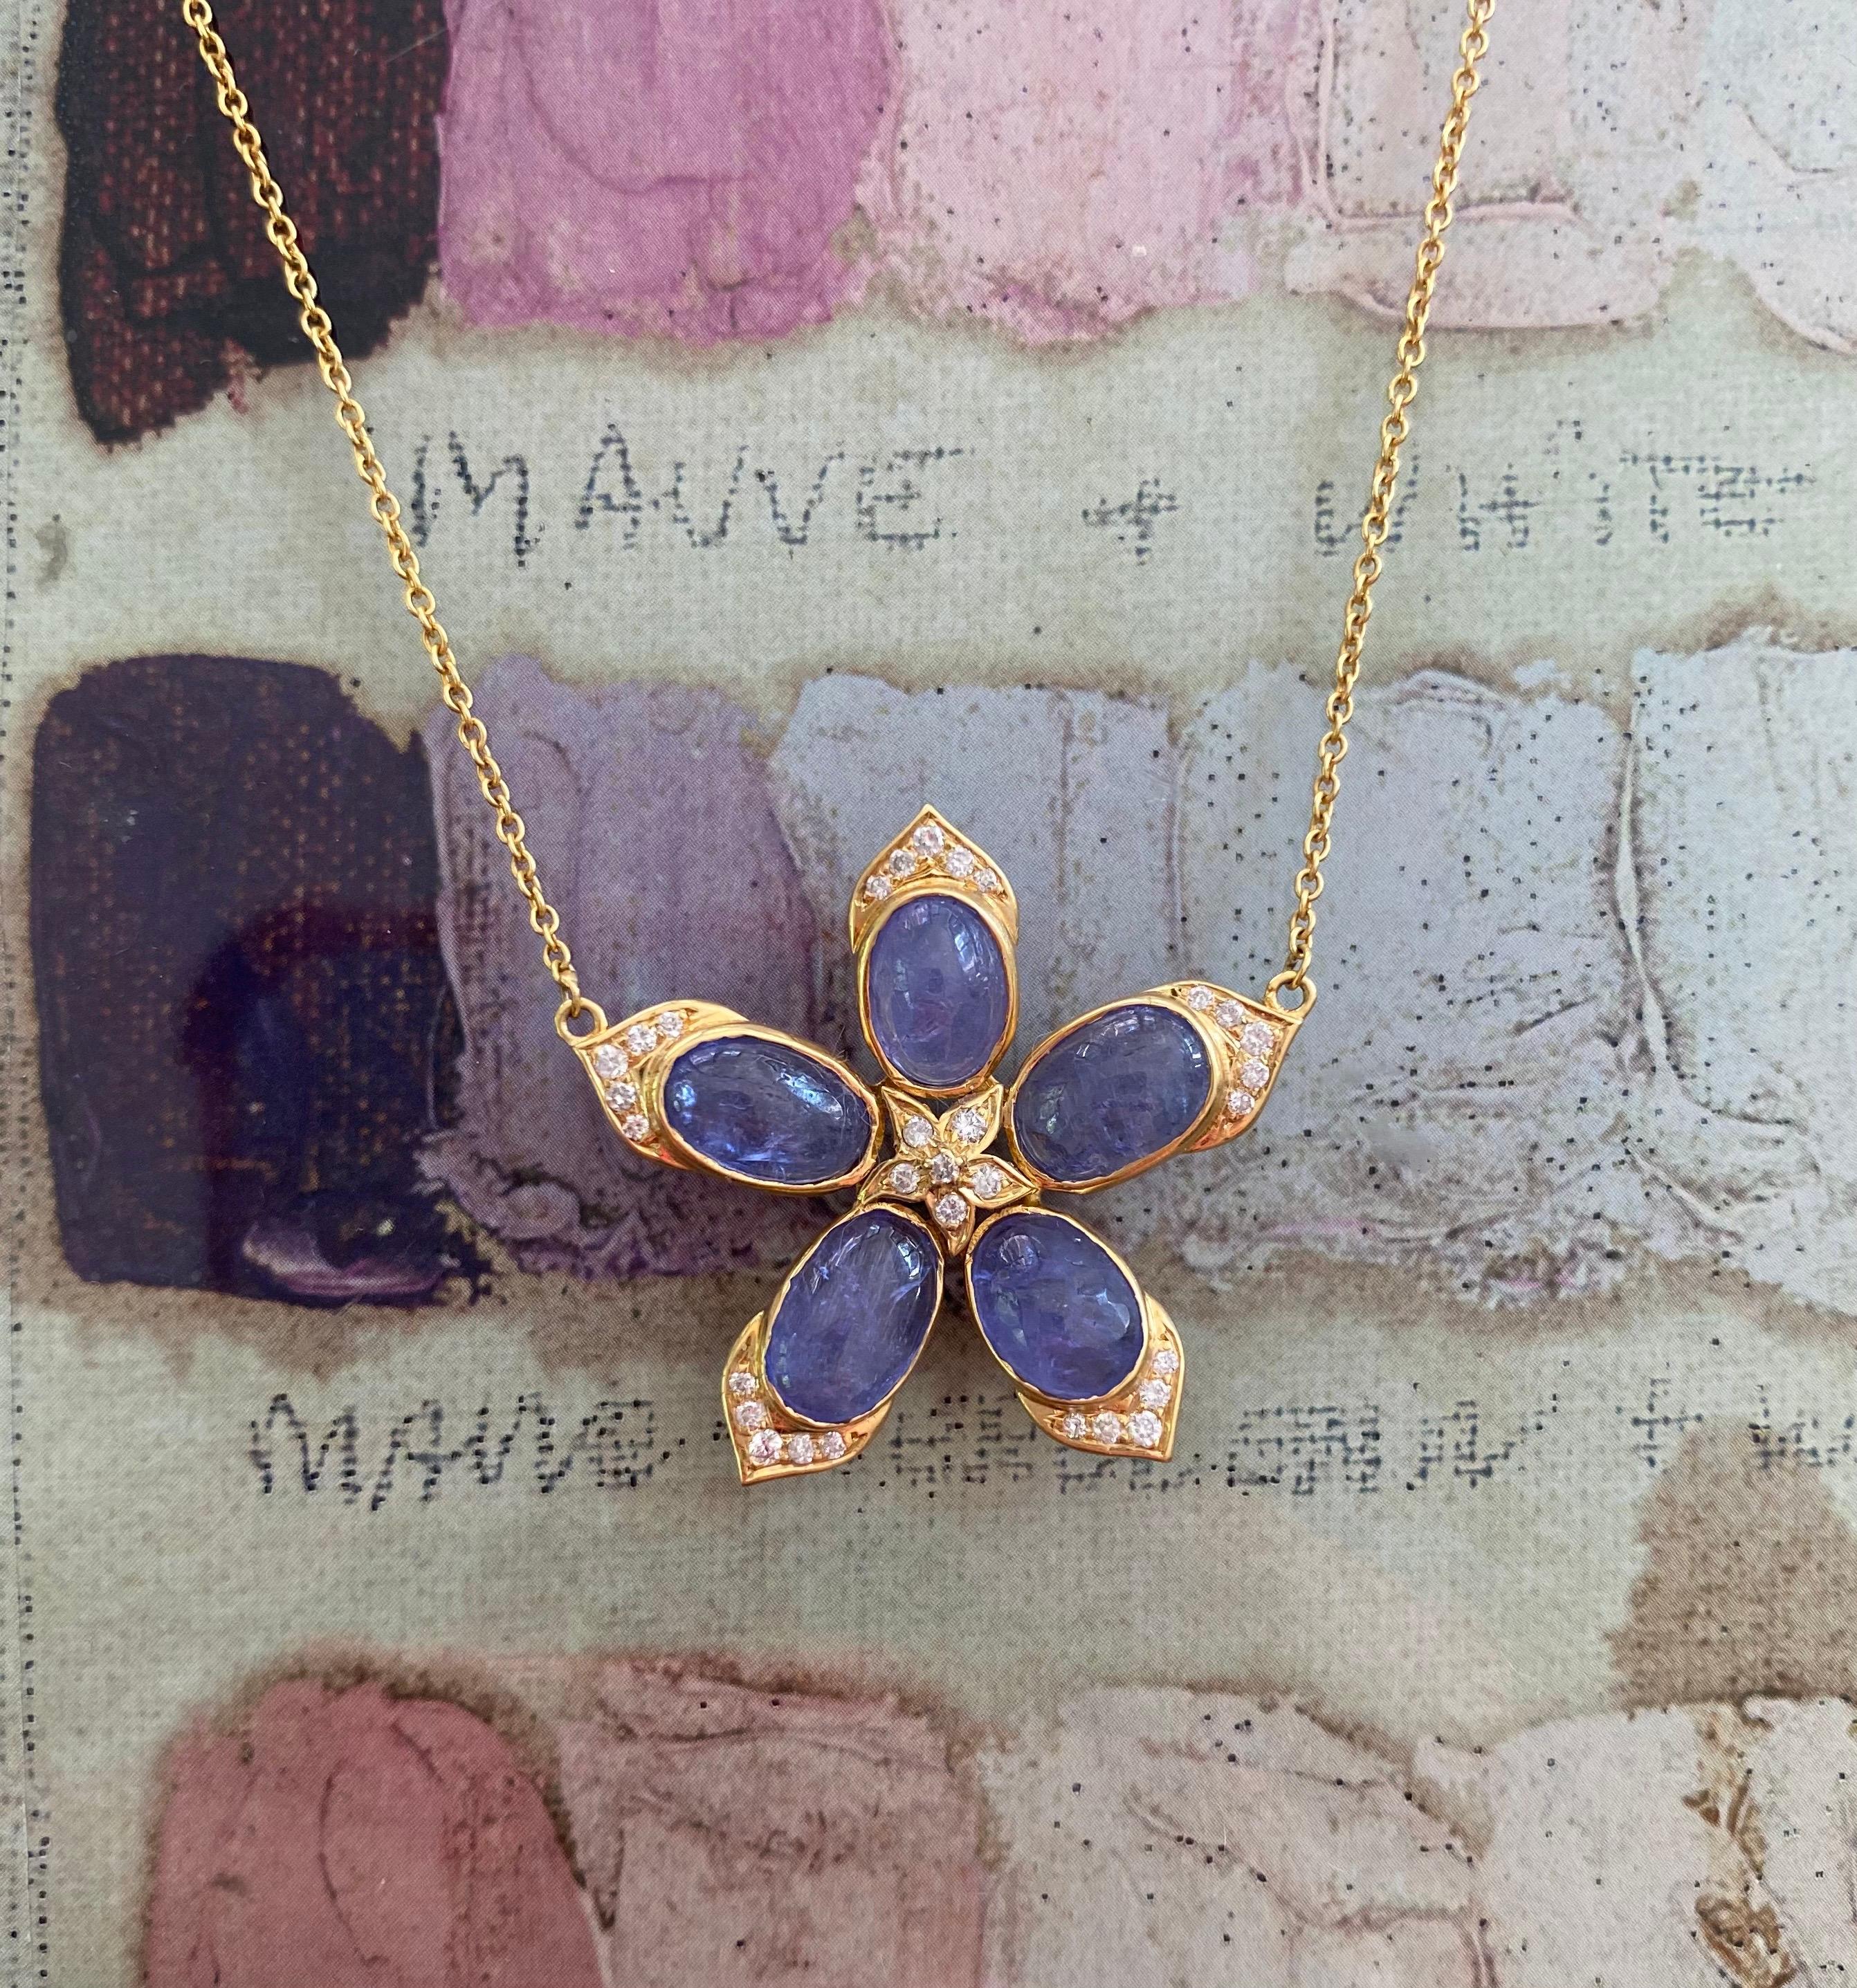 7.05cts Tanzanite, Diamond and Gold Flower Necklace by Lauren Harper In New Condition For Sale In Winnetka, IL